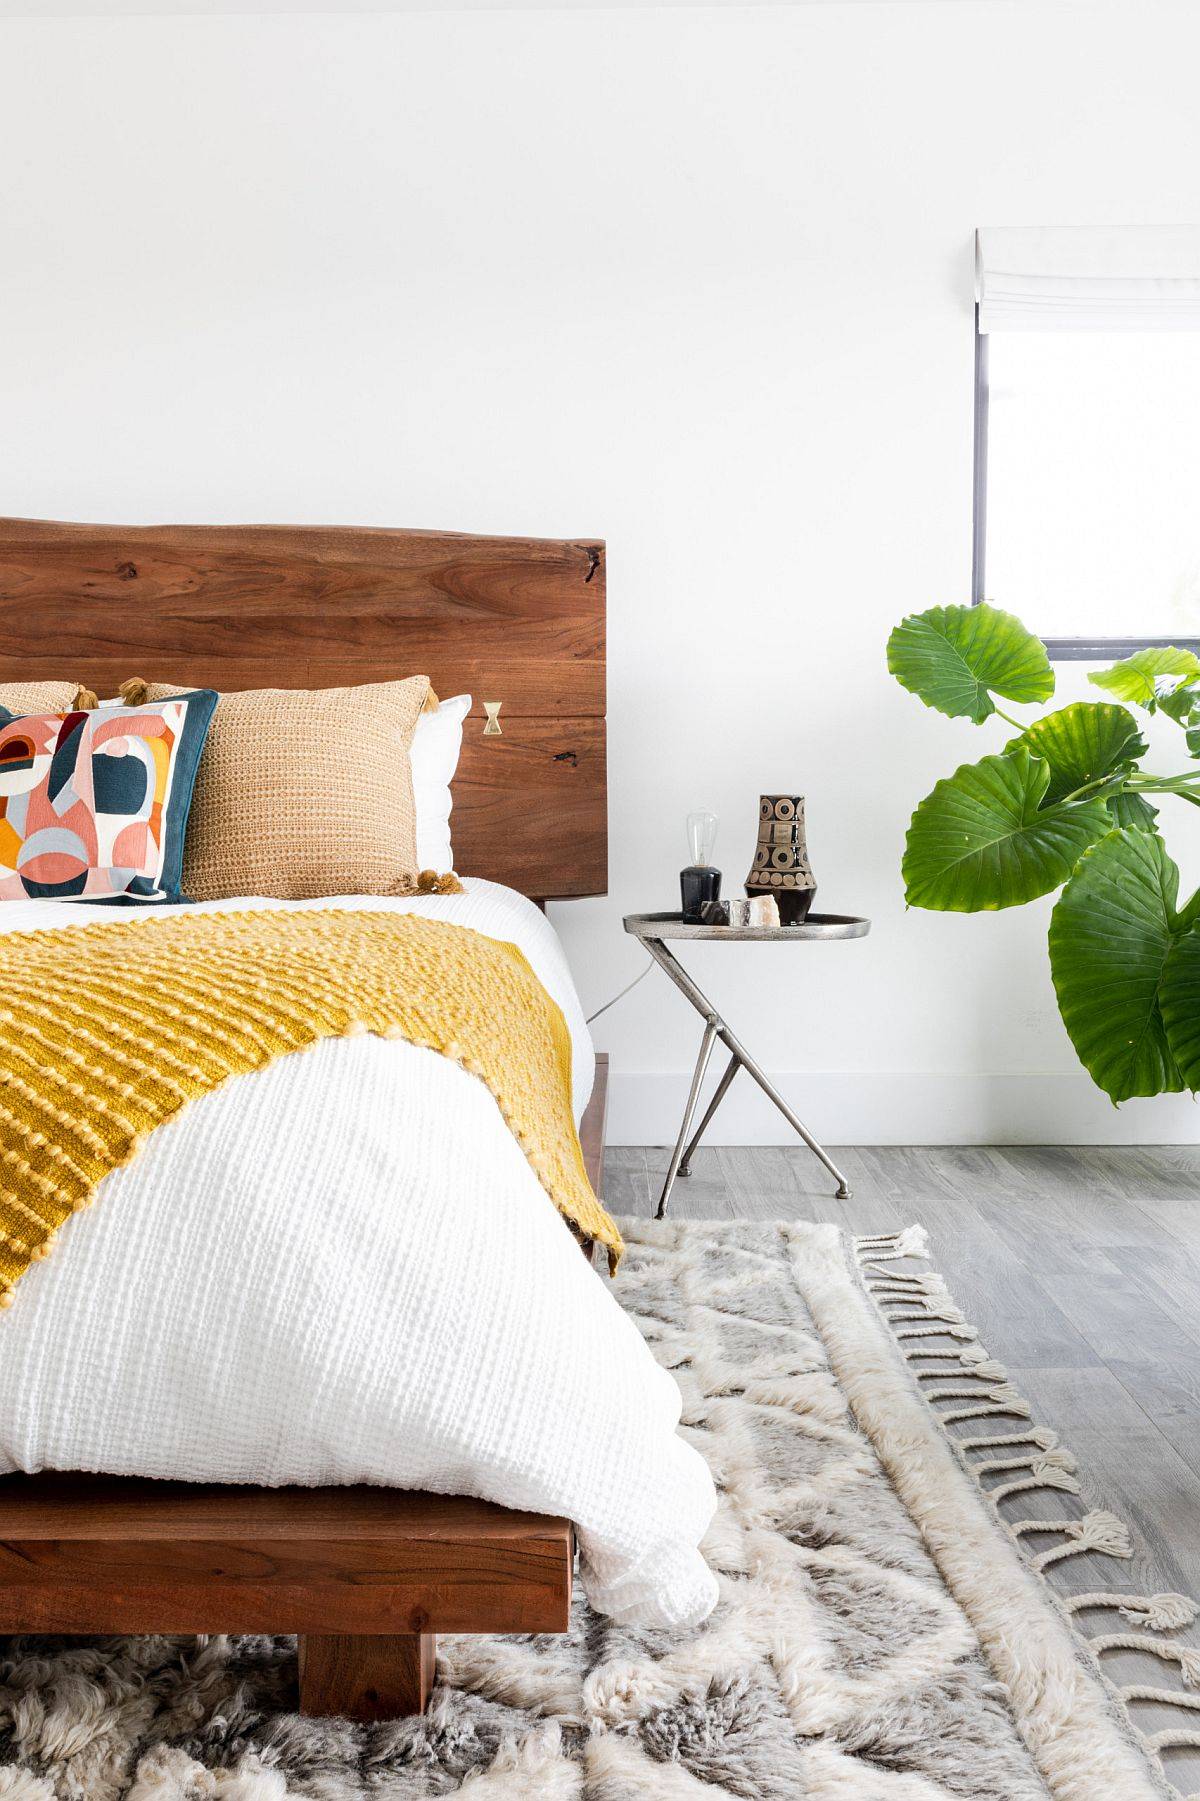 Wood and white look in the bedroom is a showstopper even in the eclectic bedroom